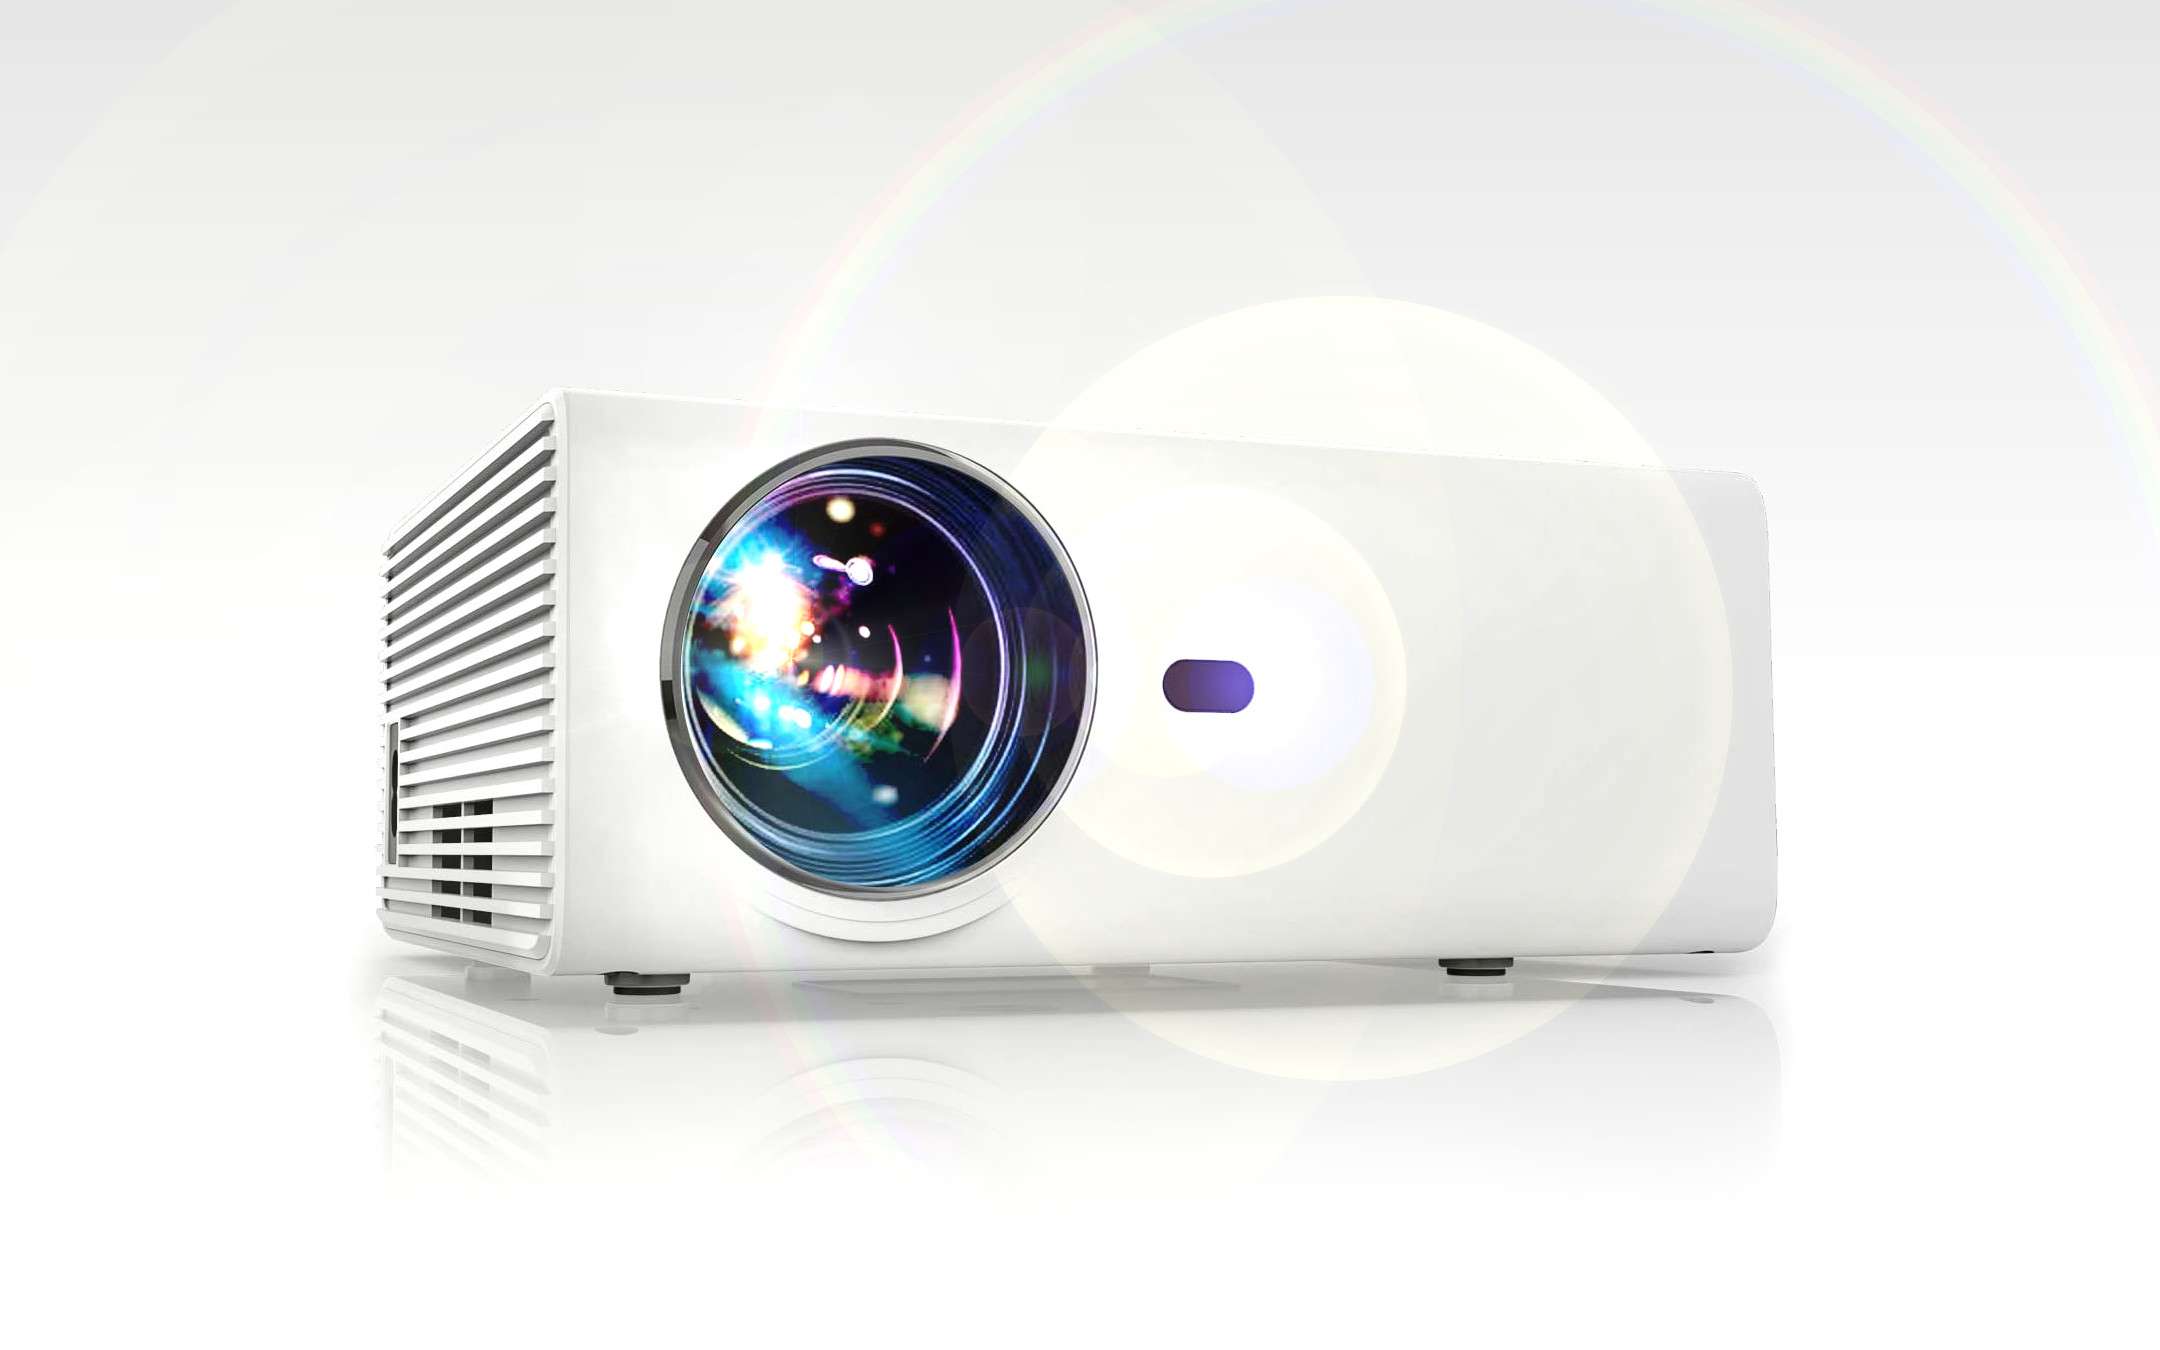 A projector for just over 50 euros? It can be done